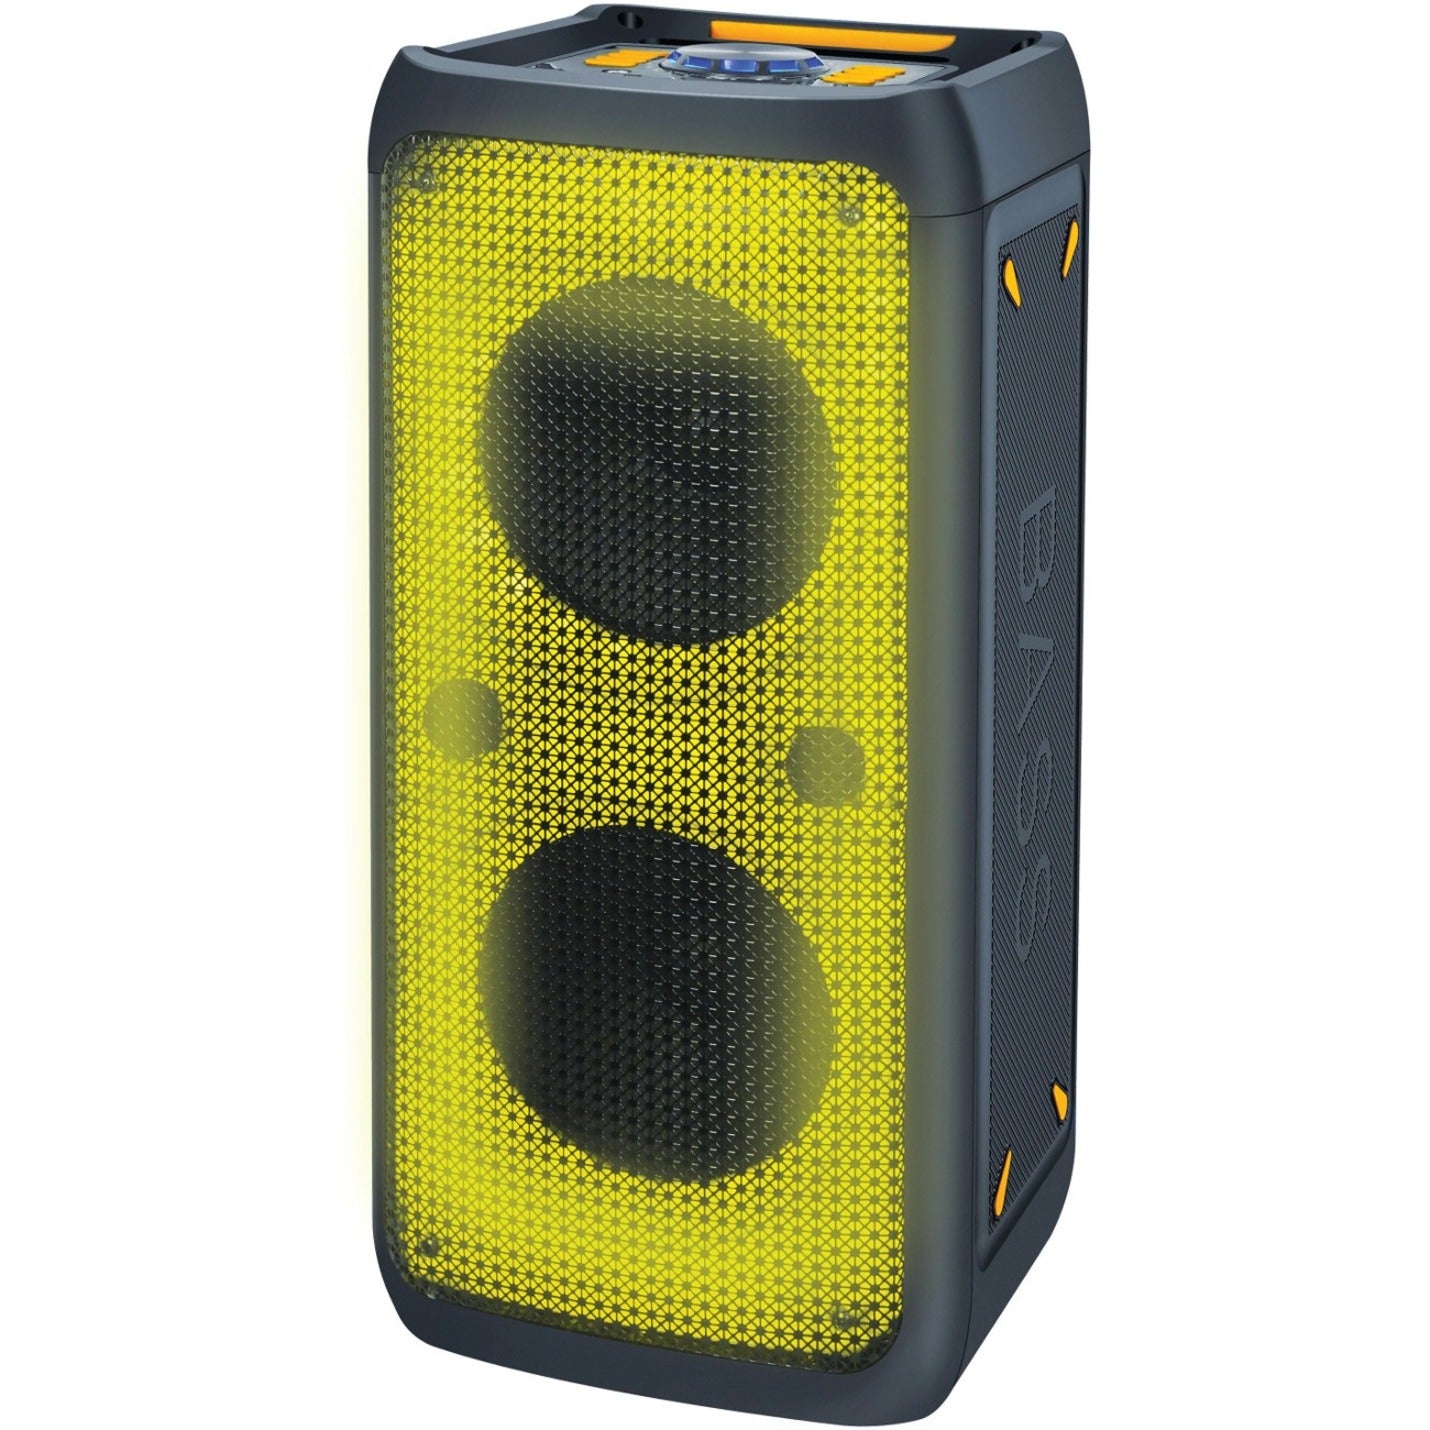 IQ Sound IQ-7028DJBT 2x 8" Portable Bluetooth Speaker with True Wireless Technology, Color Changing LED, Remote Control, Microphone